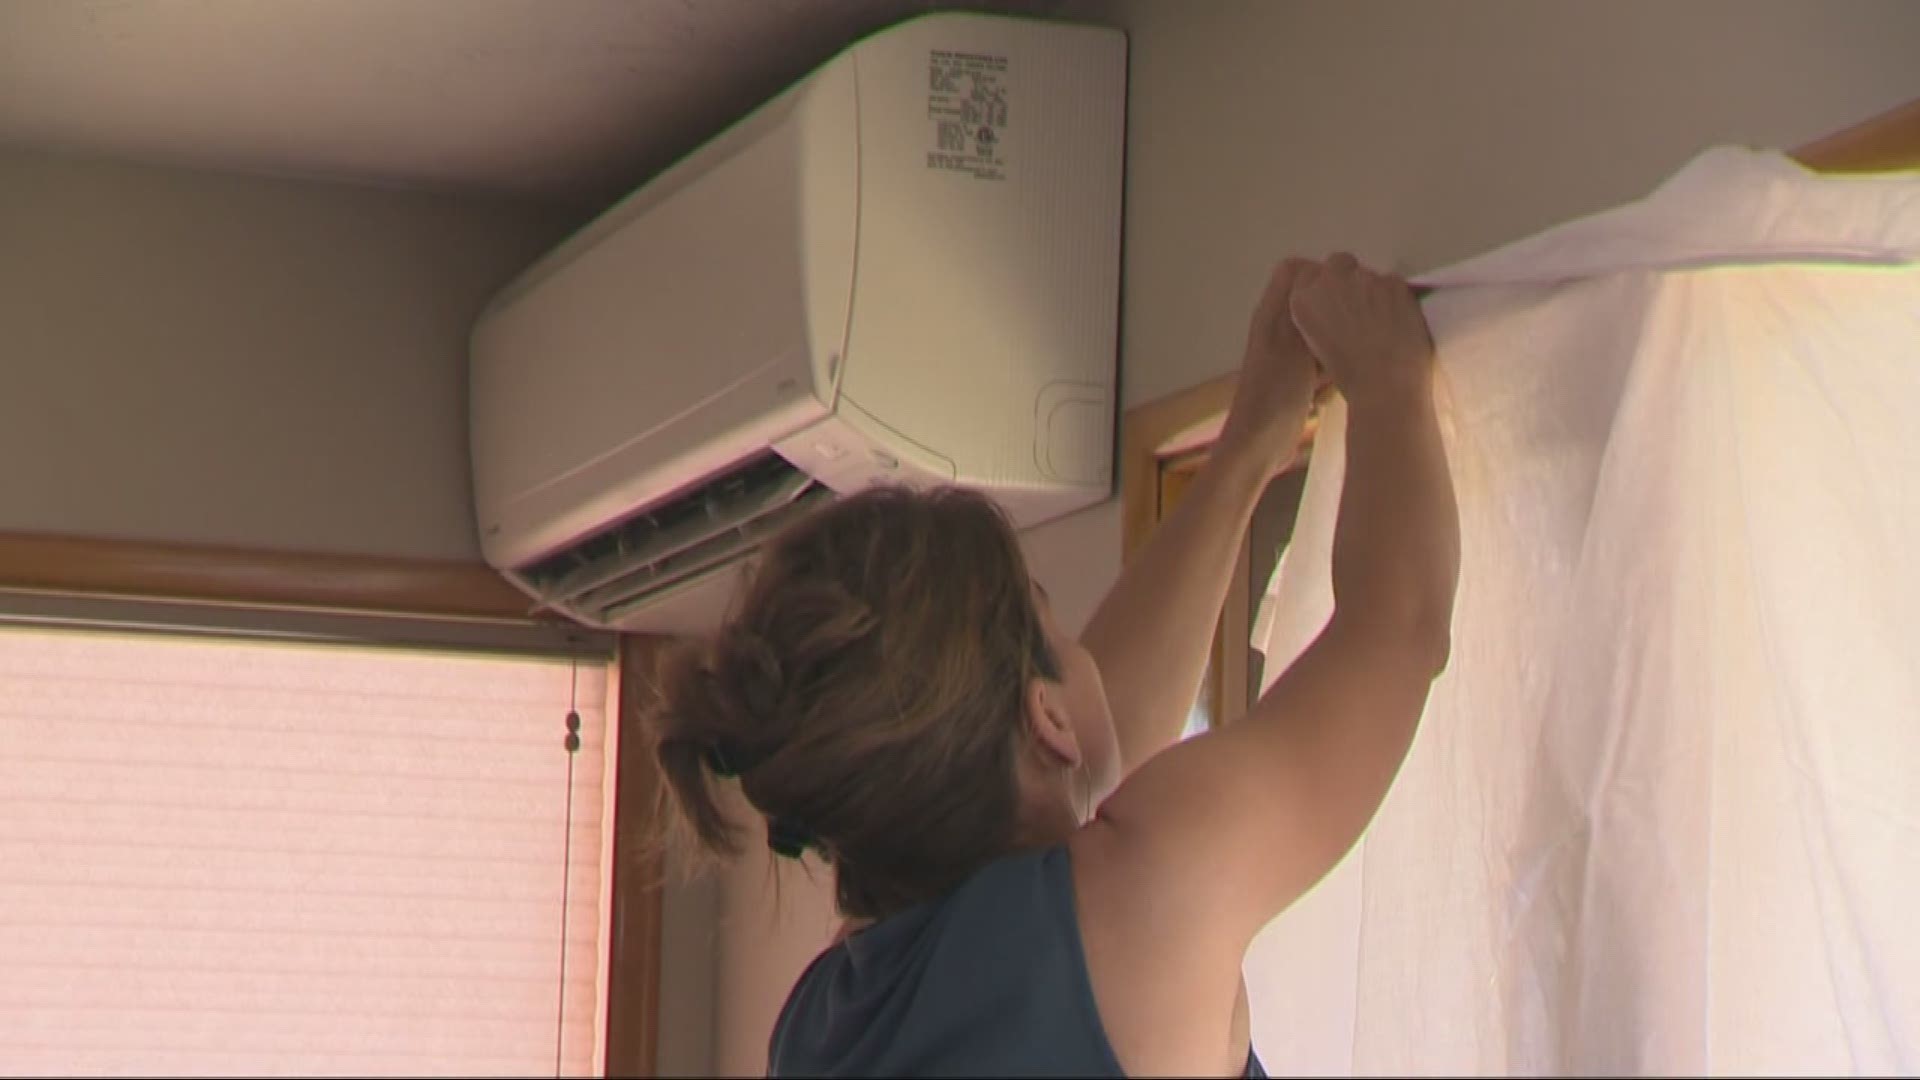 Tips to keep the house cool during the heat.